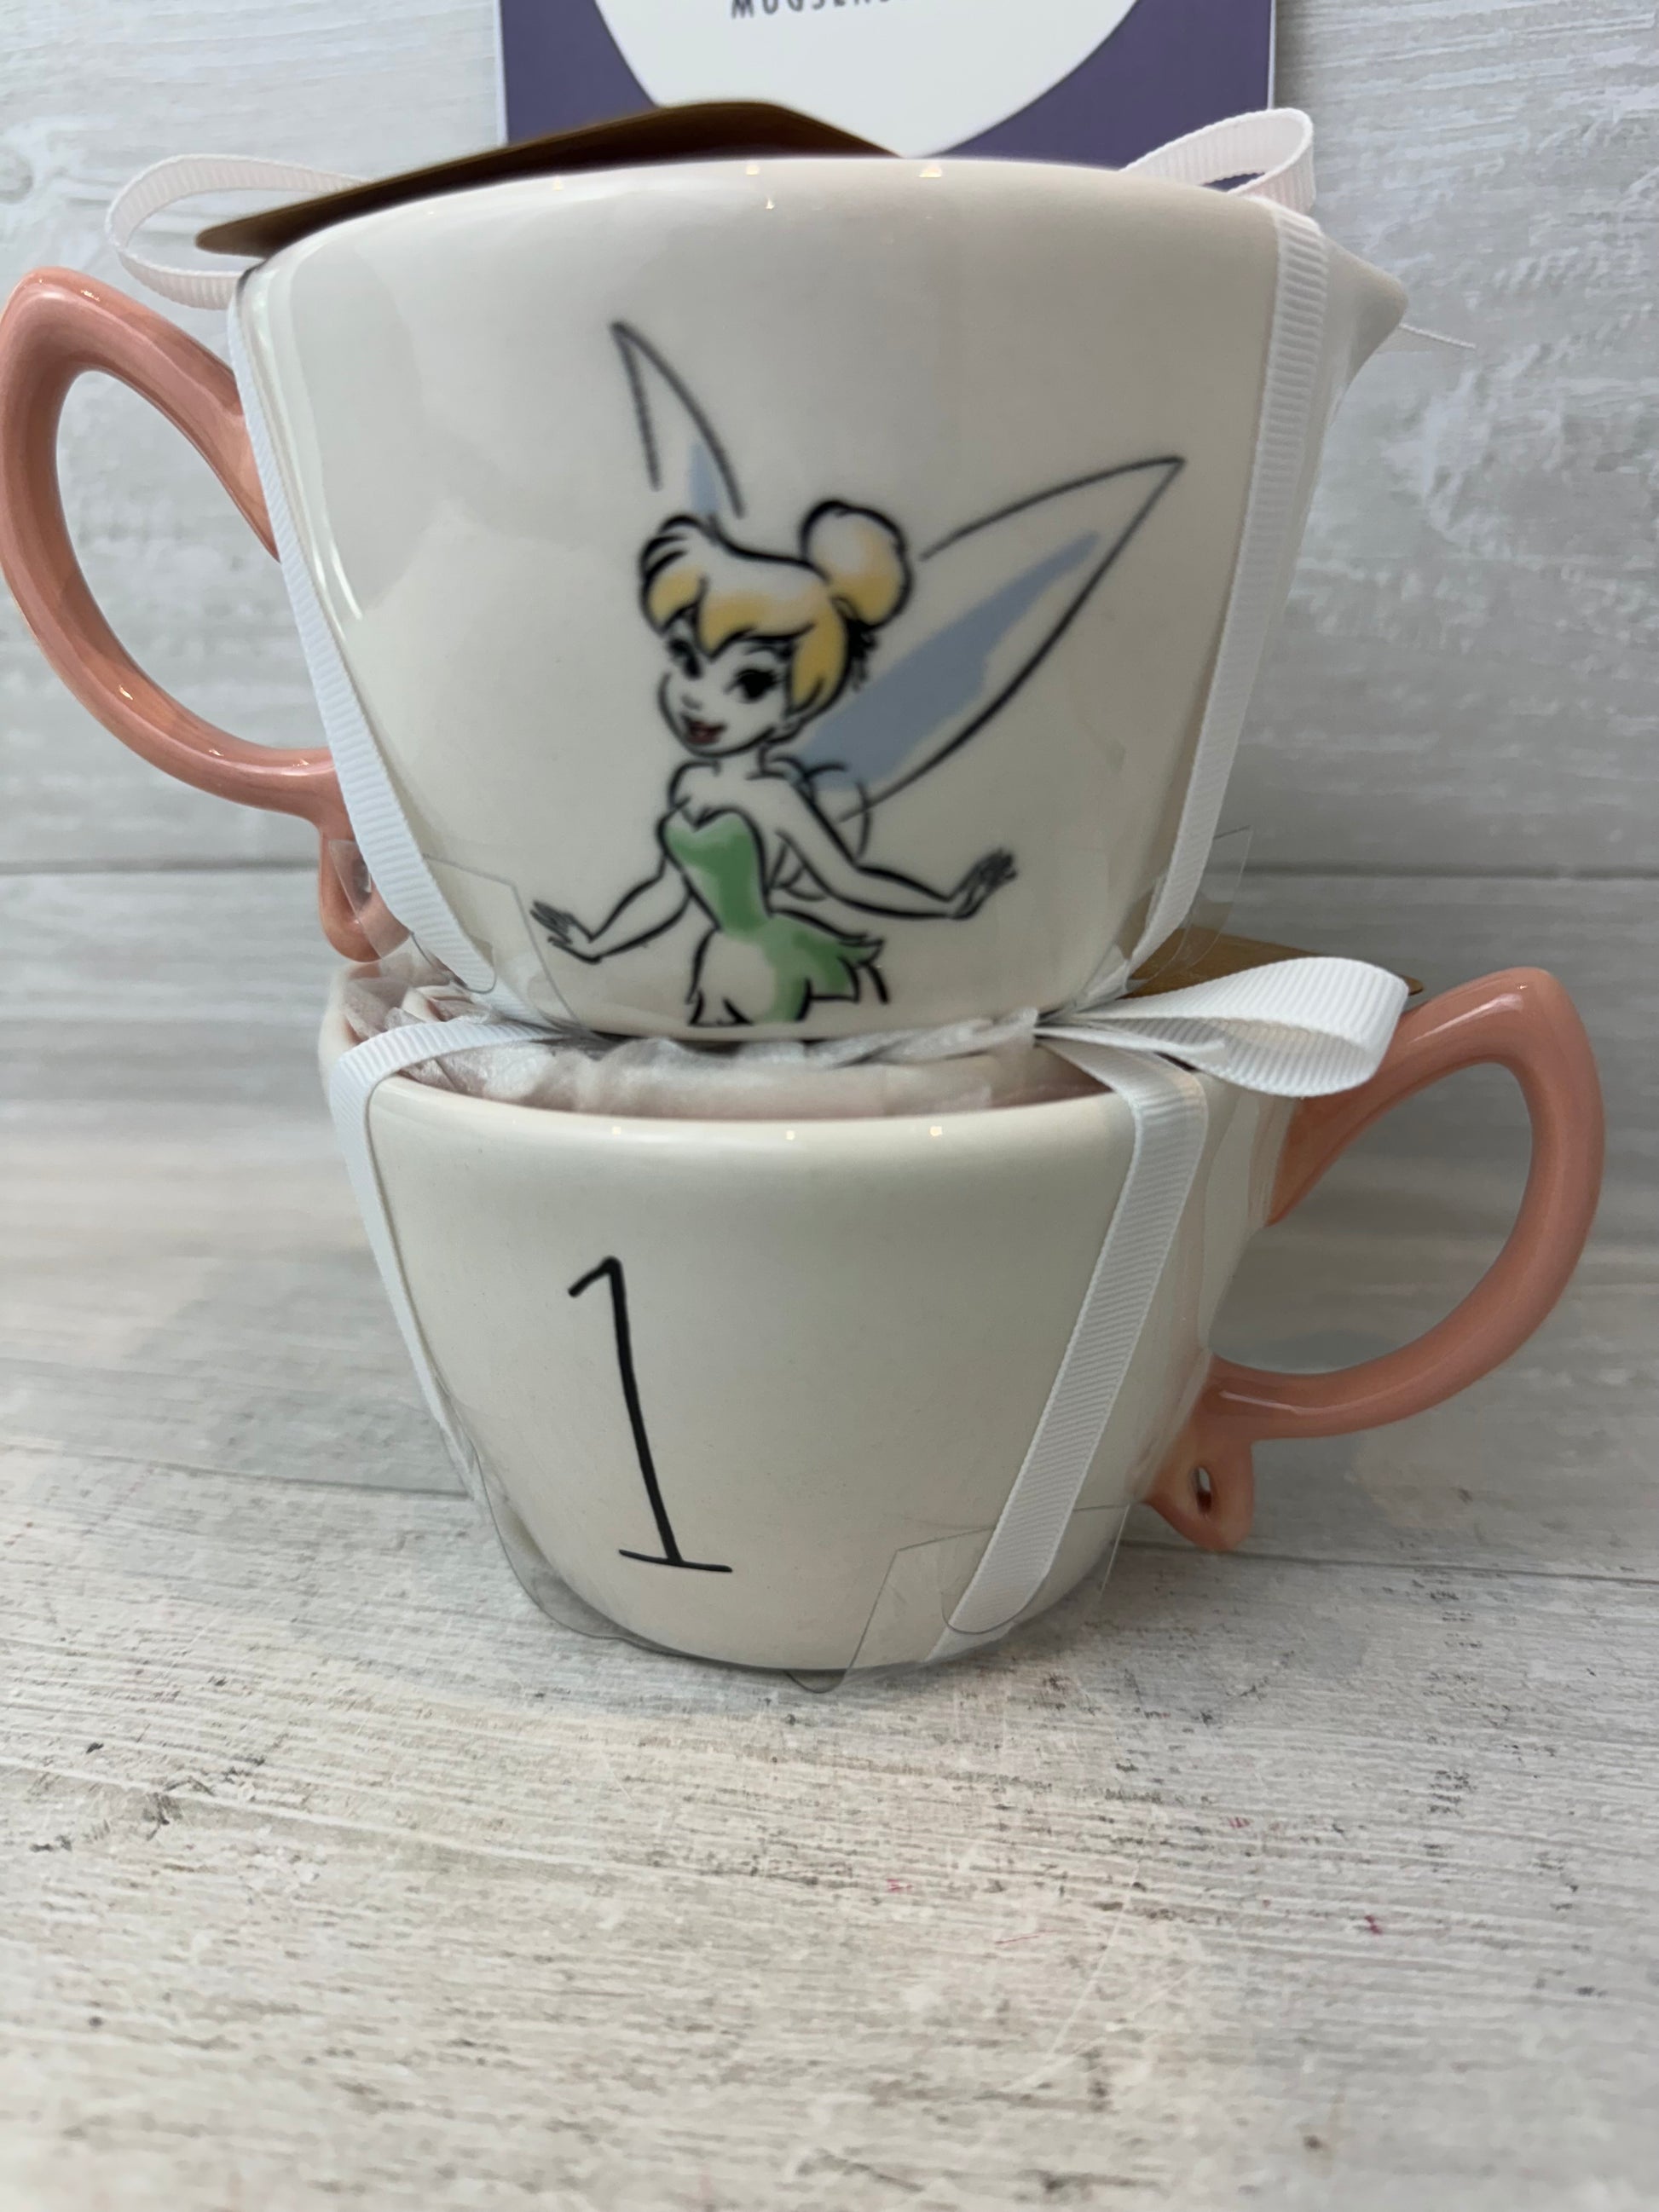 Rae Dunn Tinkerbell Measuring Cups Set Of 4 Disney's Peter Pan Collection